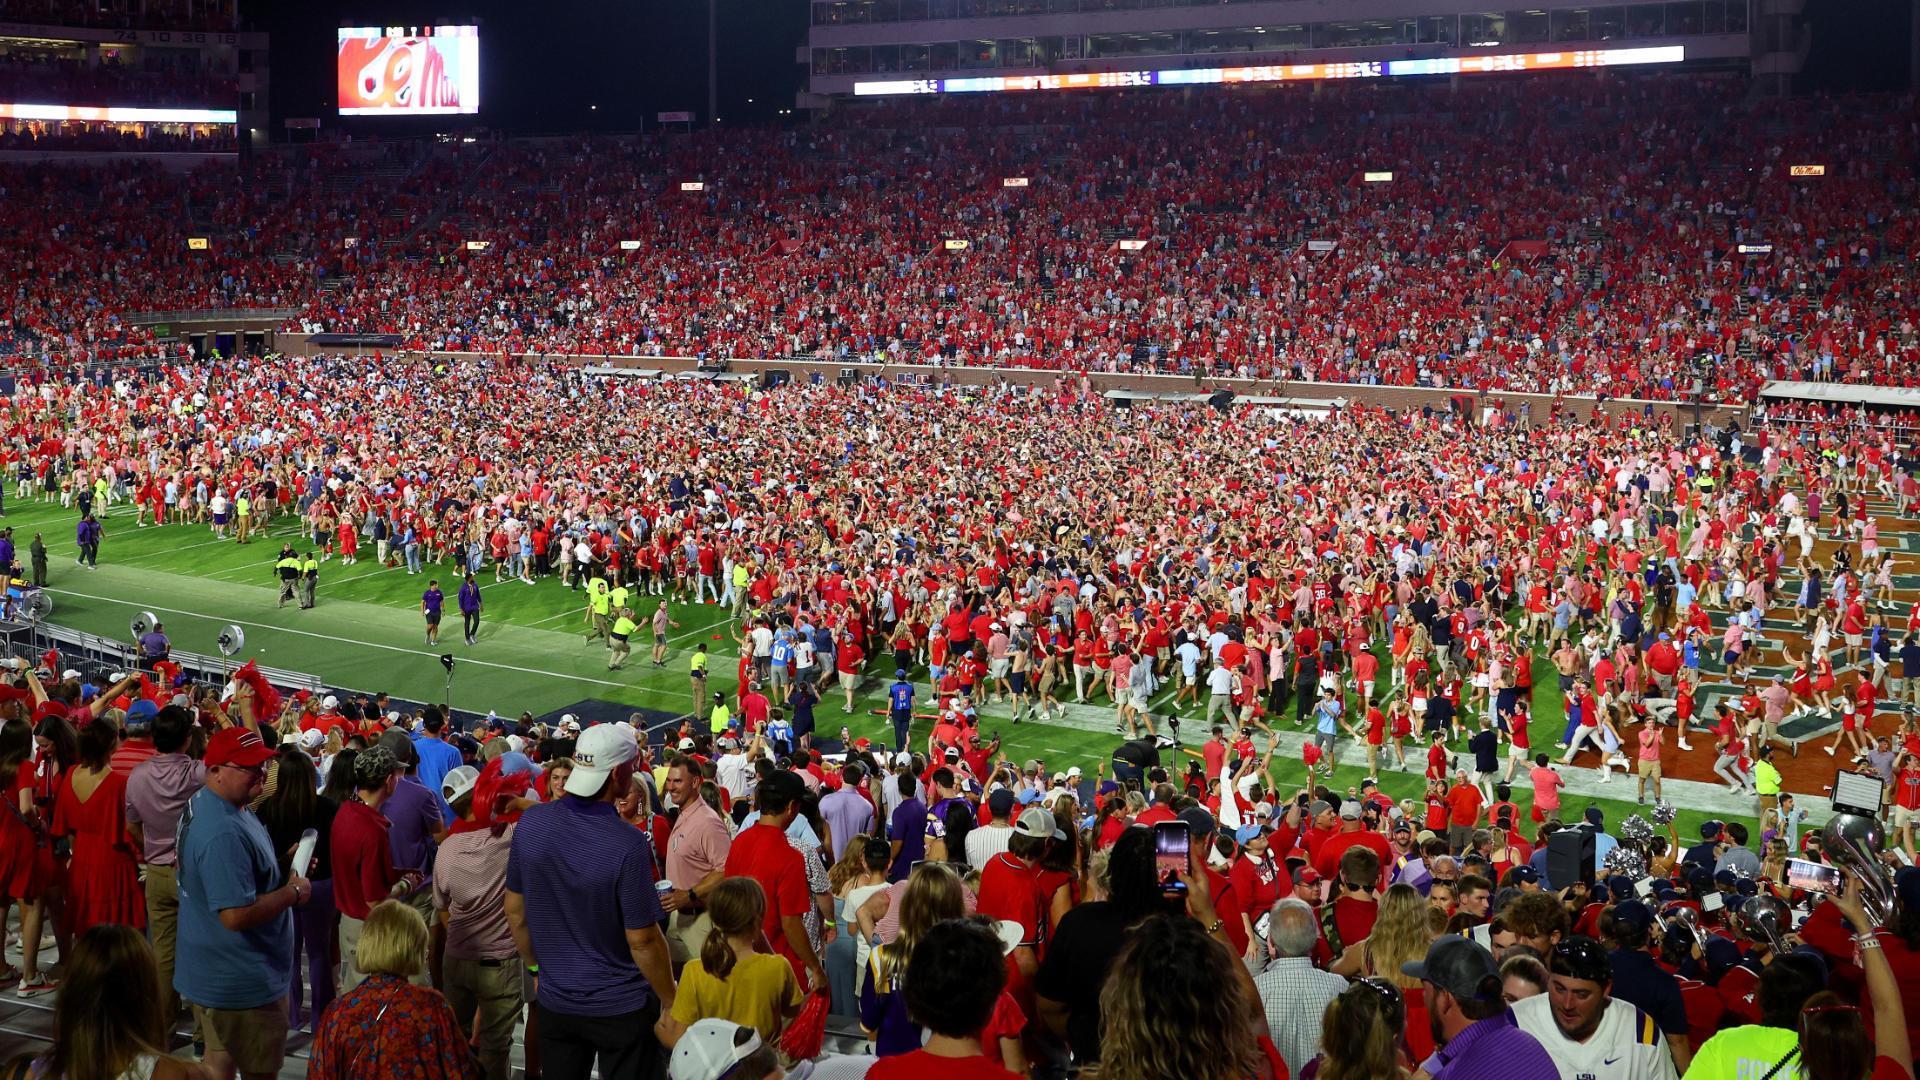 Ole Miss fans rush the field after hanging on to defeat LSU